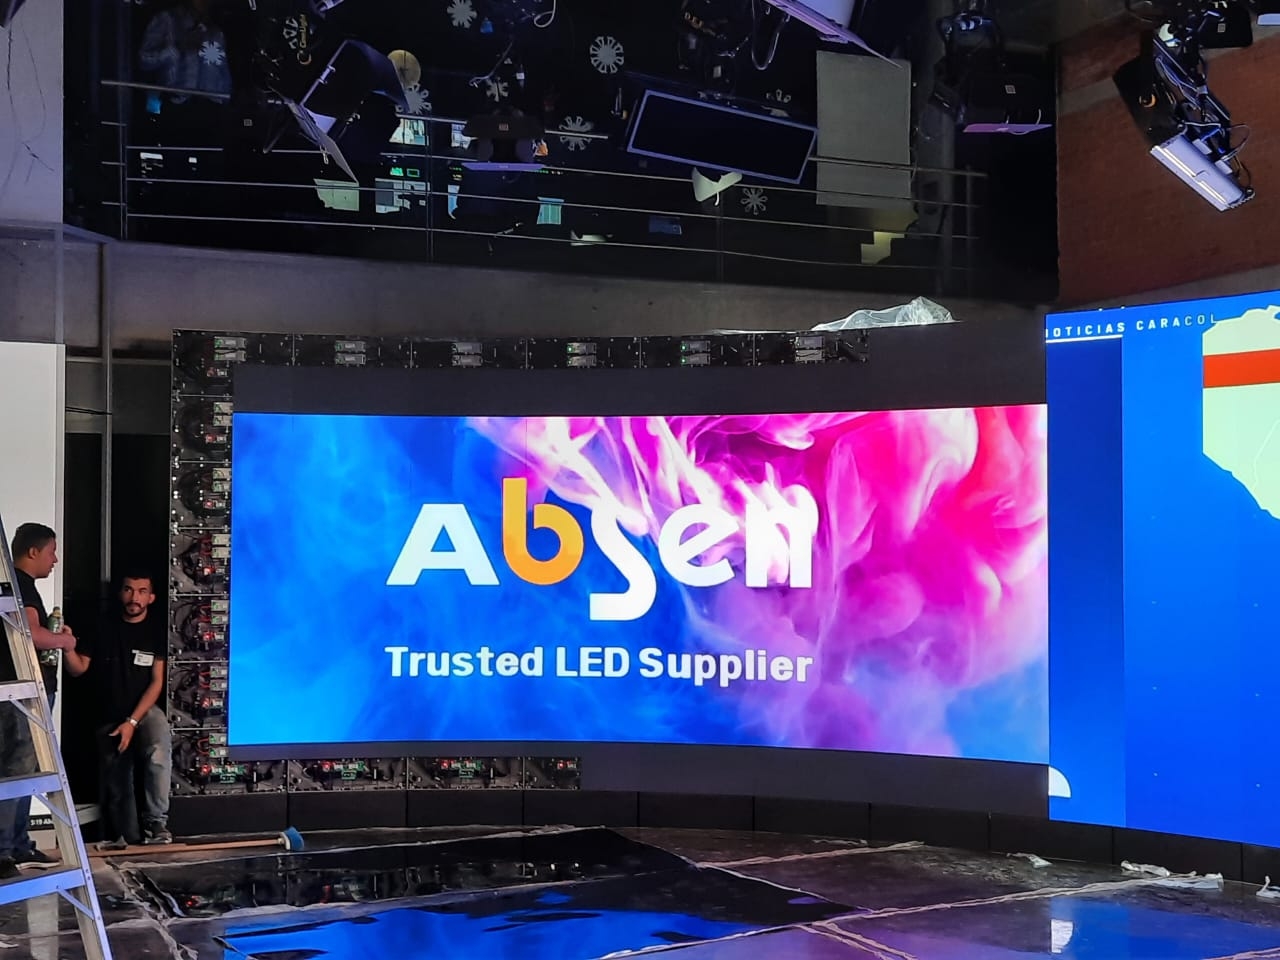 Meyella Penge gummi debitor Absen on Twitter: "It is so wow that Absen created a LED wall in Noticias  Caracol, currently the most-watched newscast in Colombia, using KL1.2 II.  Very thanks for the choice and trust